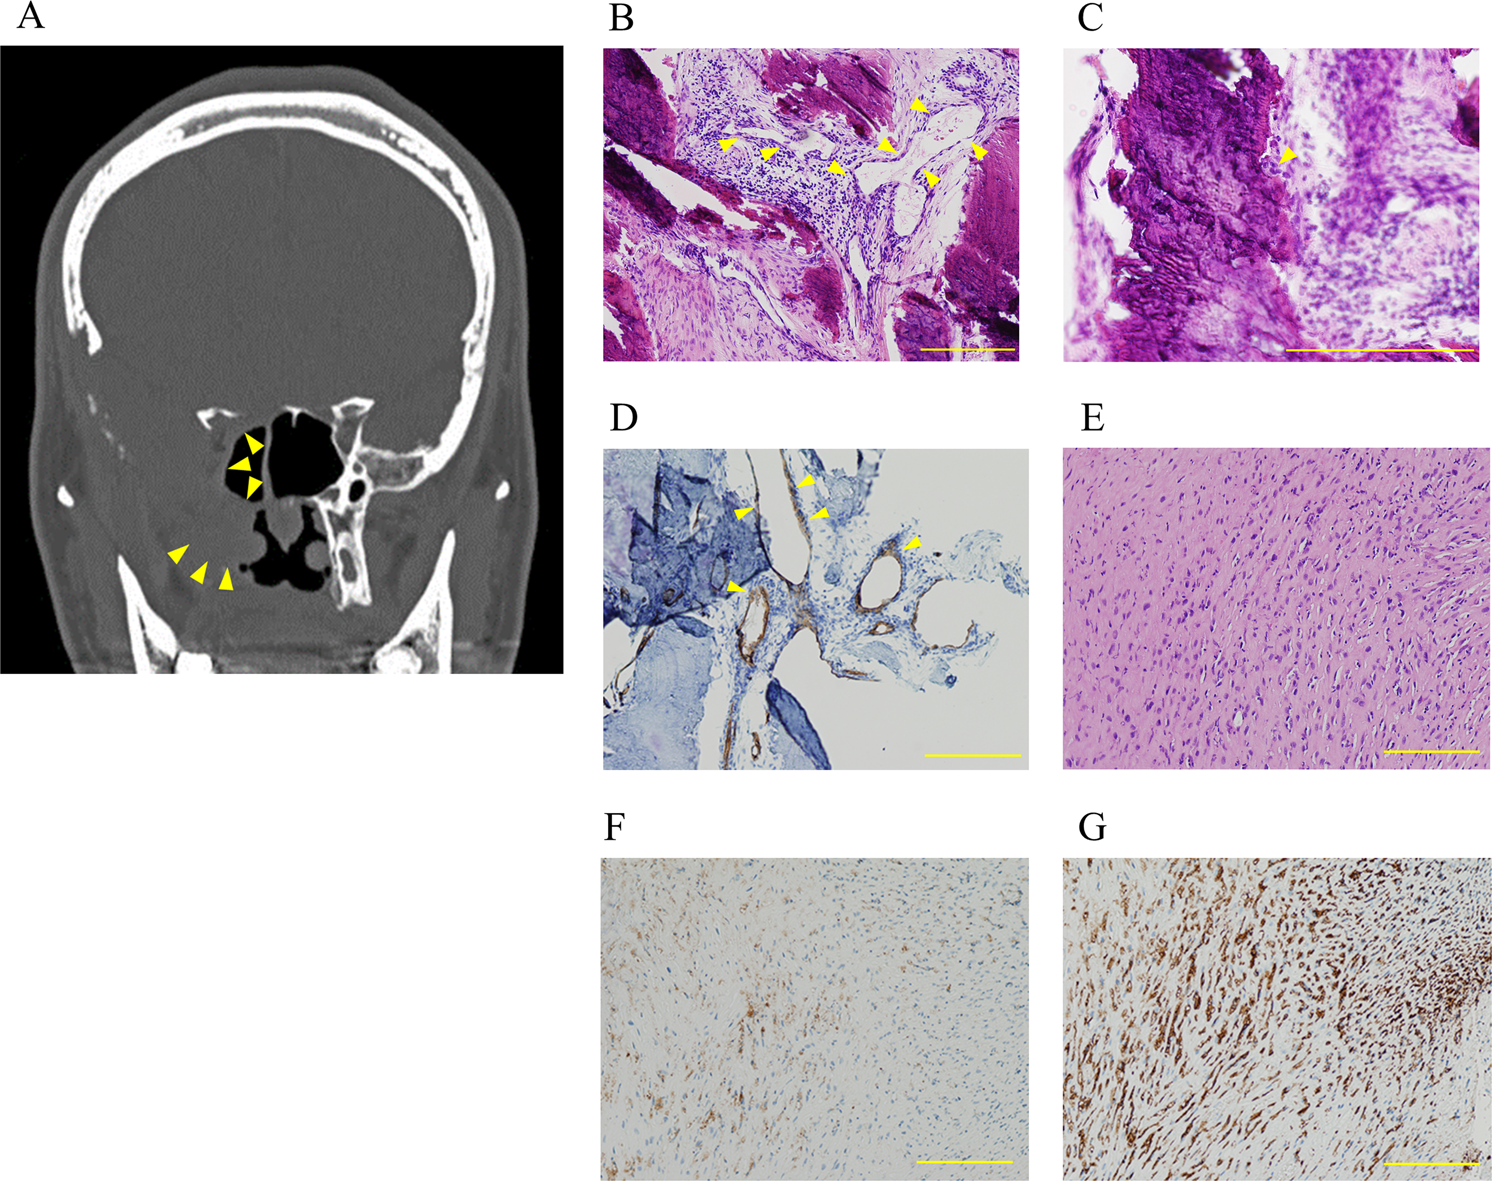 (PDF) Identification of de novo EP300 and PLAU variants in a patient with  Rubinstein–Taybi syndrome-related arterial vasculopathy and skeletal anomaly